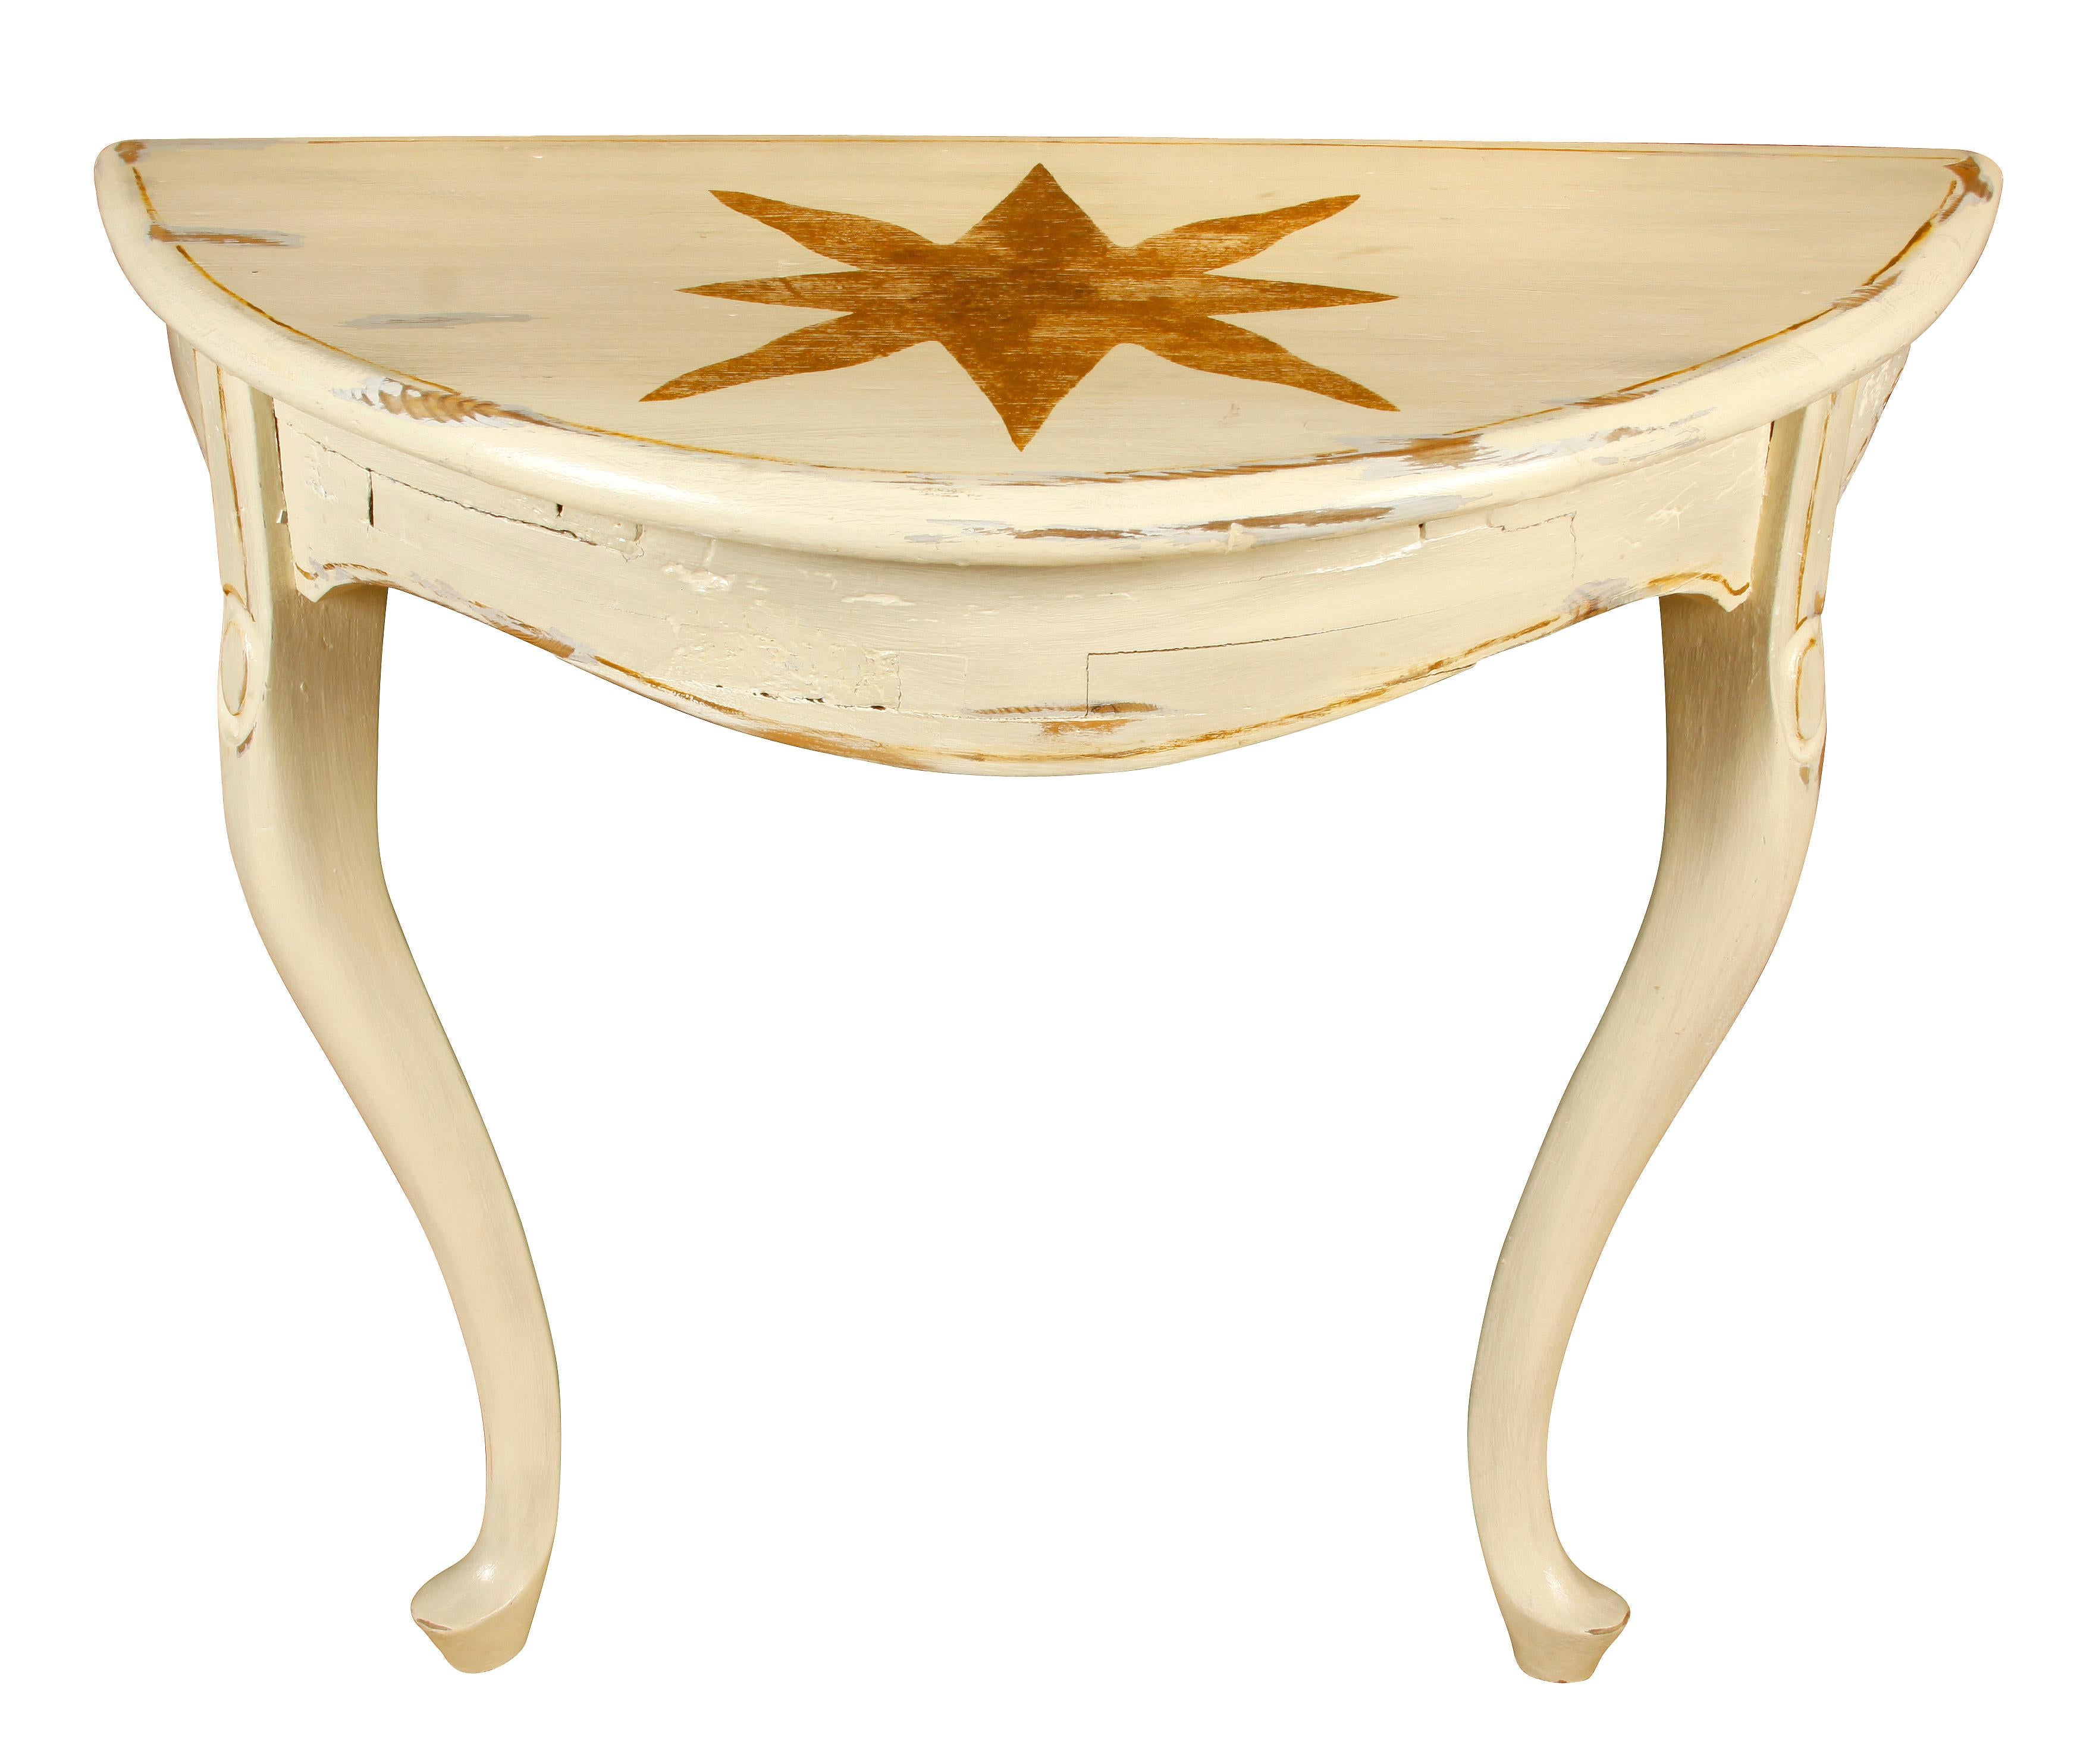 A pair of hand painted star cream demilune tables, wall mounted with cabriole legs.